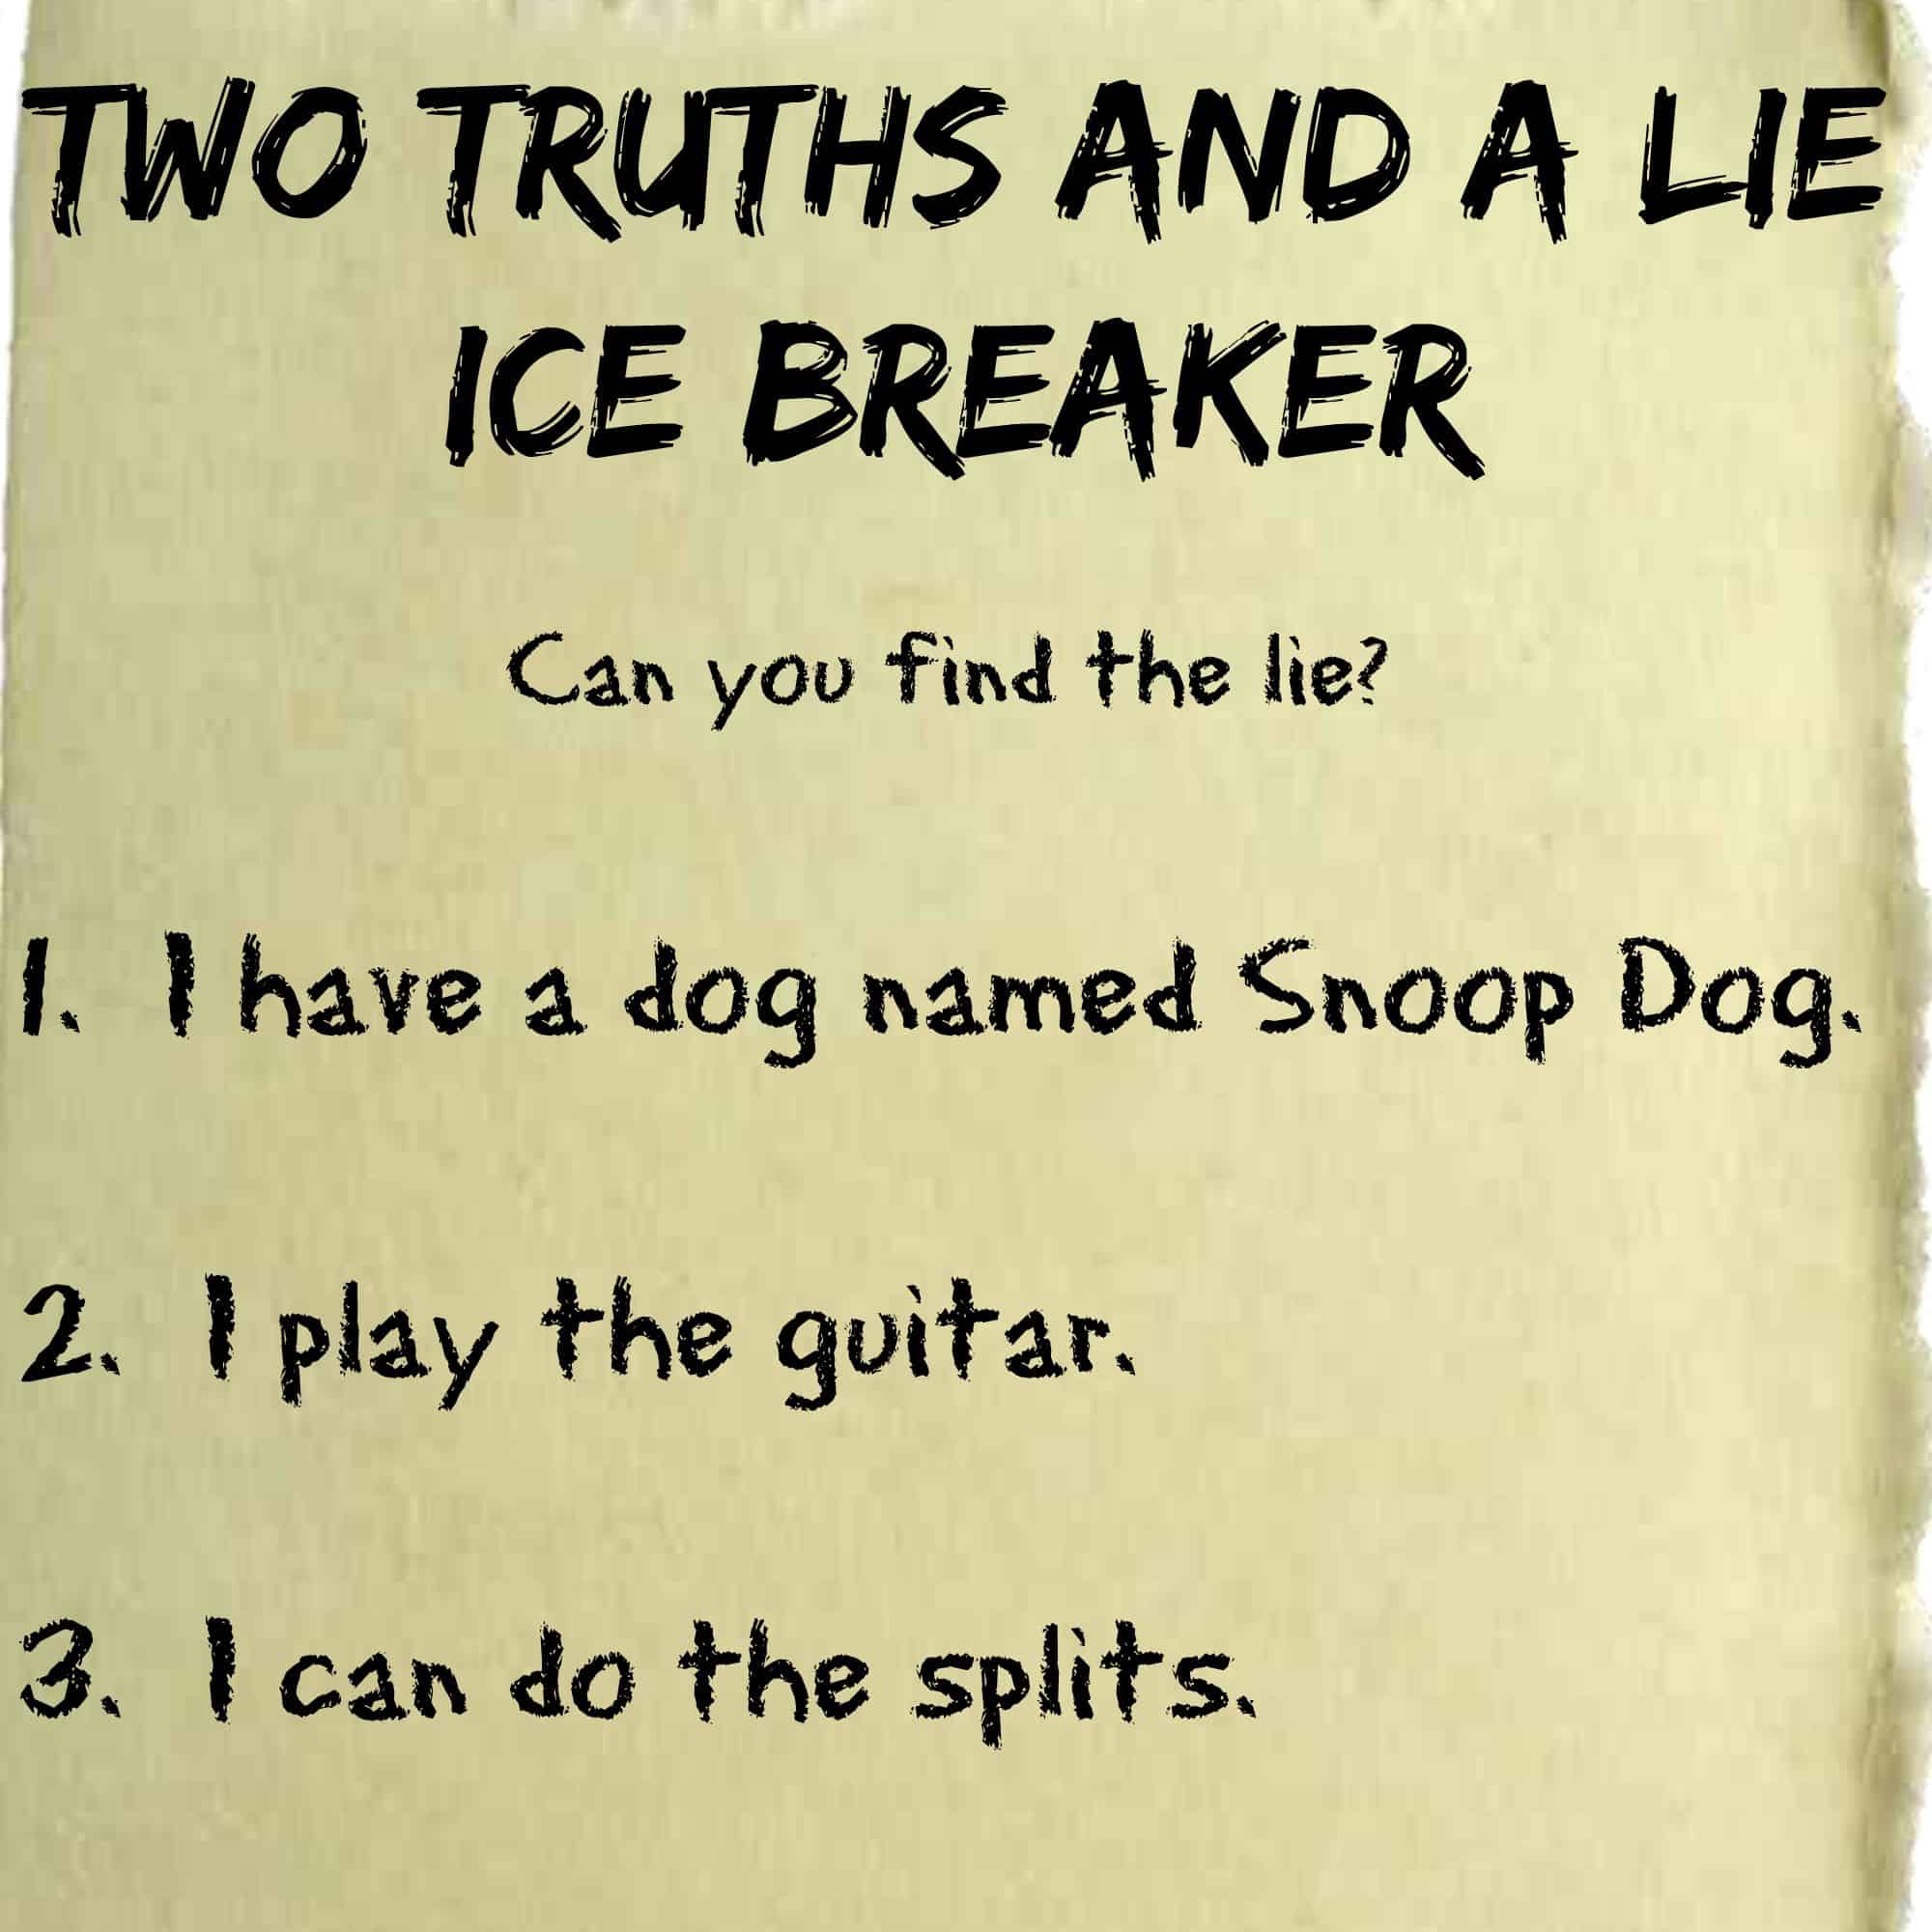 Ice Breaker Two Truths And A Lie 